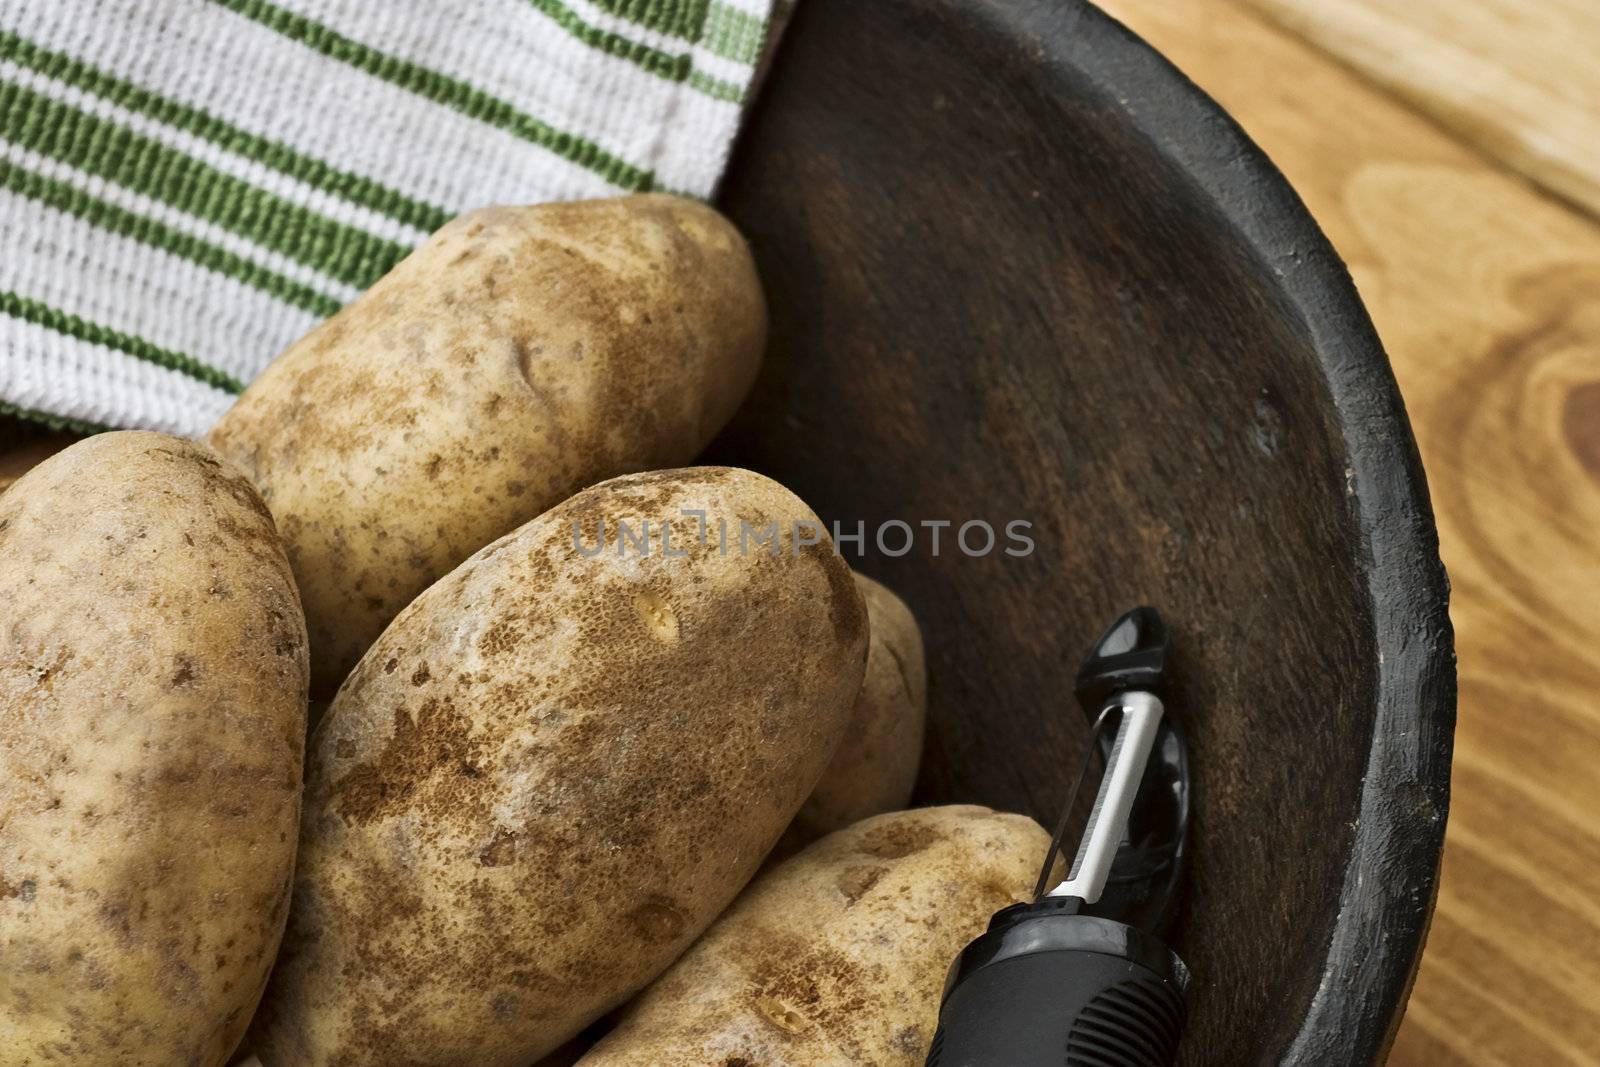 Potatoes in a hand carved wooden bowl with kitchen towel.